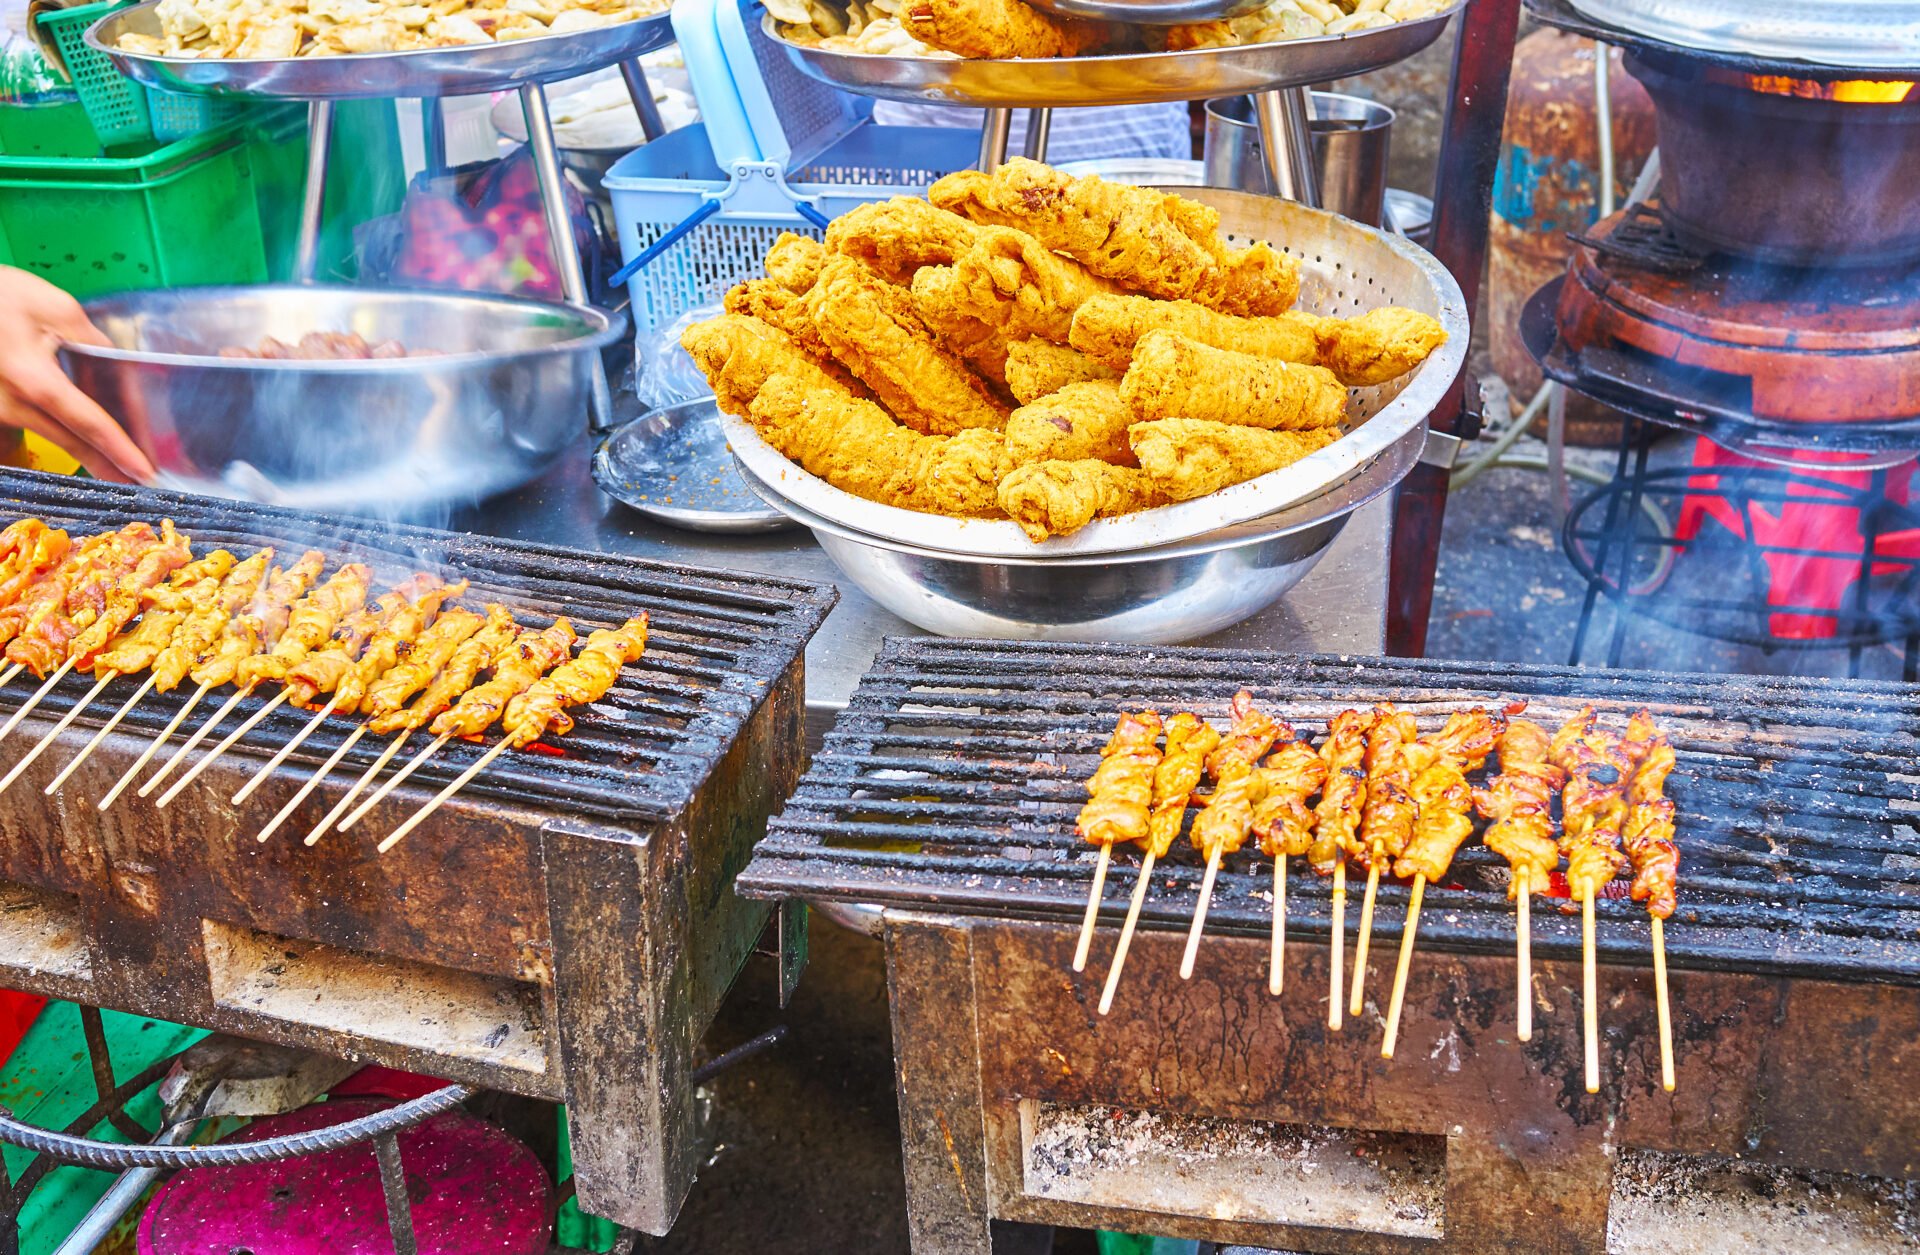 Chicken on skewers and deep fried meat on grills of outdoor cafe's open air kitchen in Chinatown market, Yangon, Myanmar.